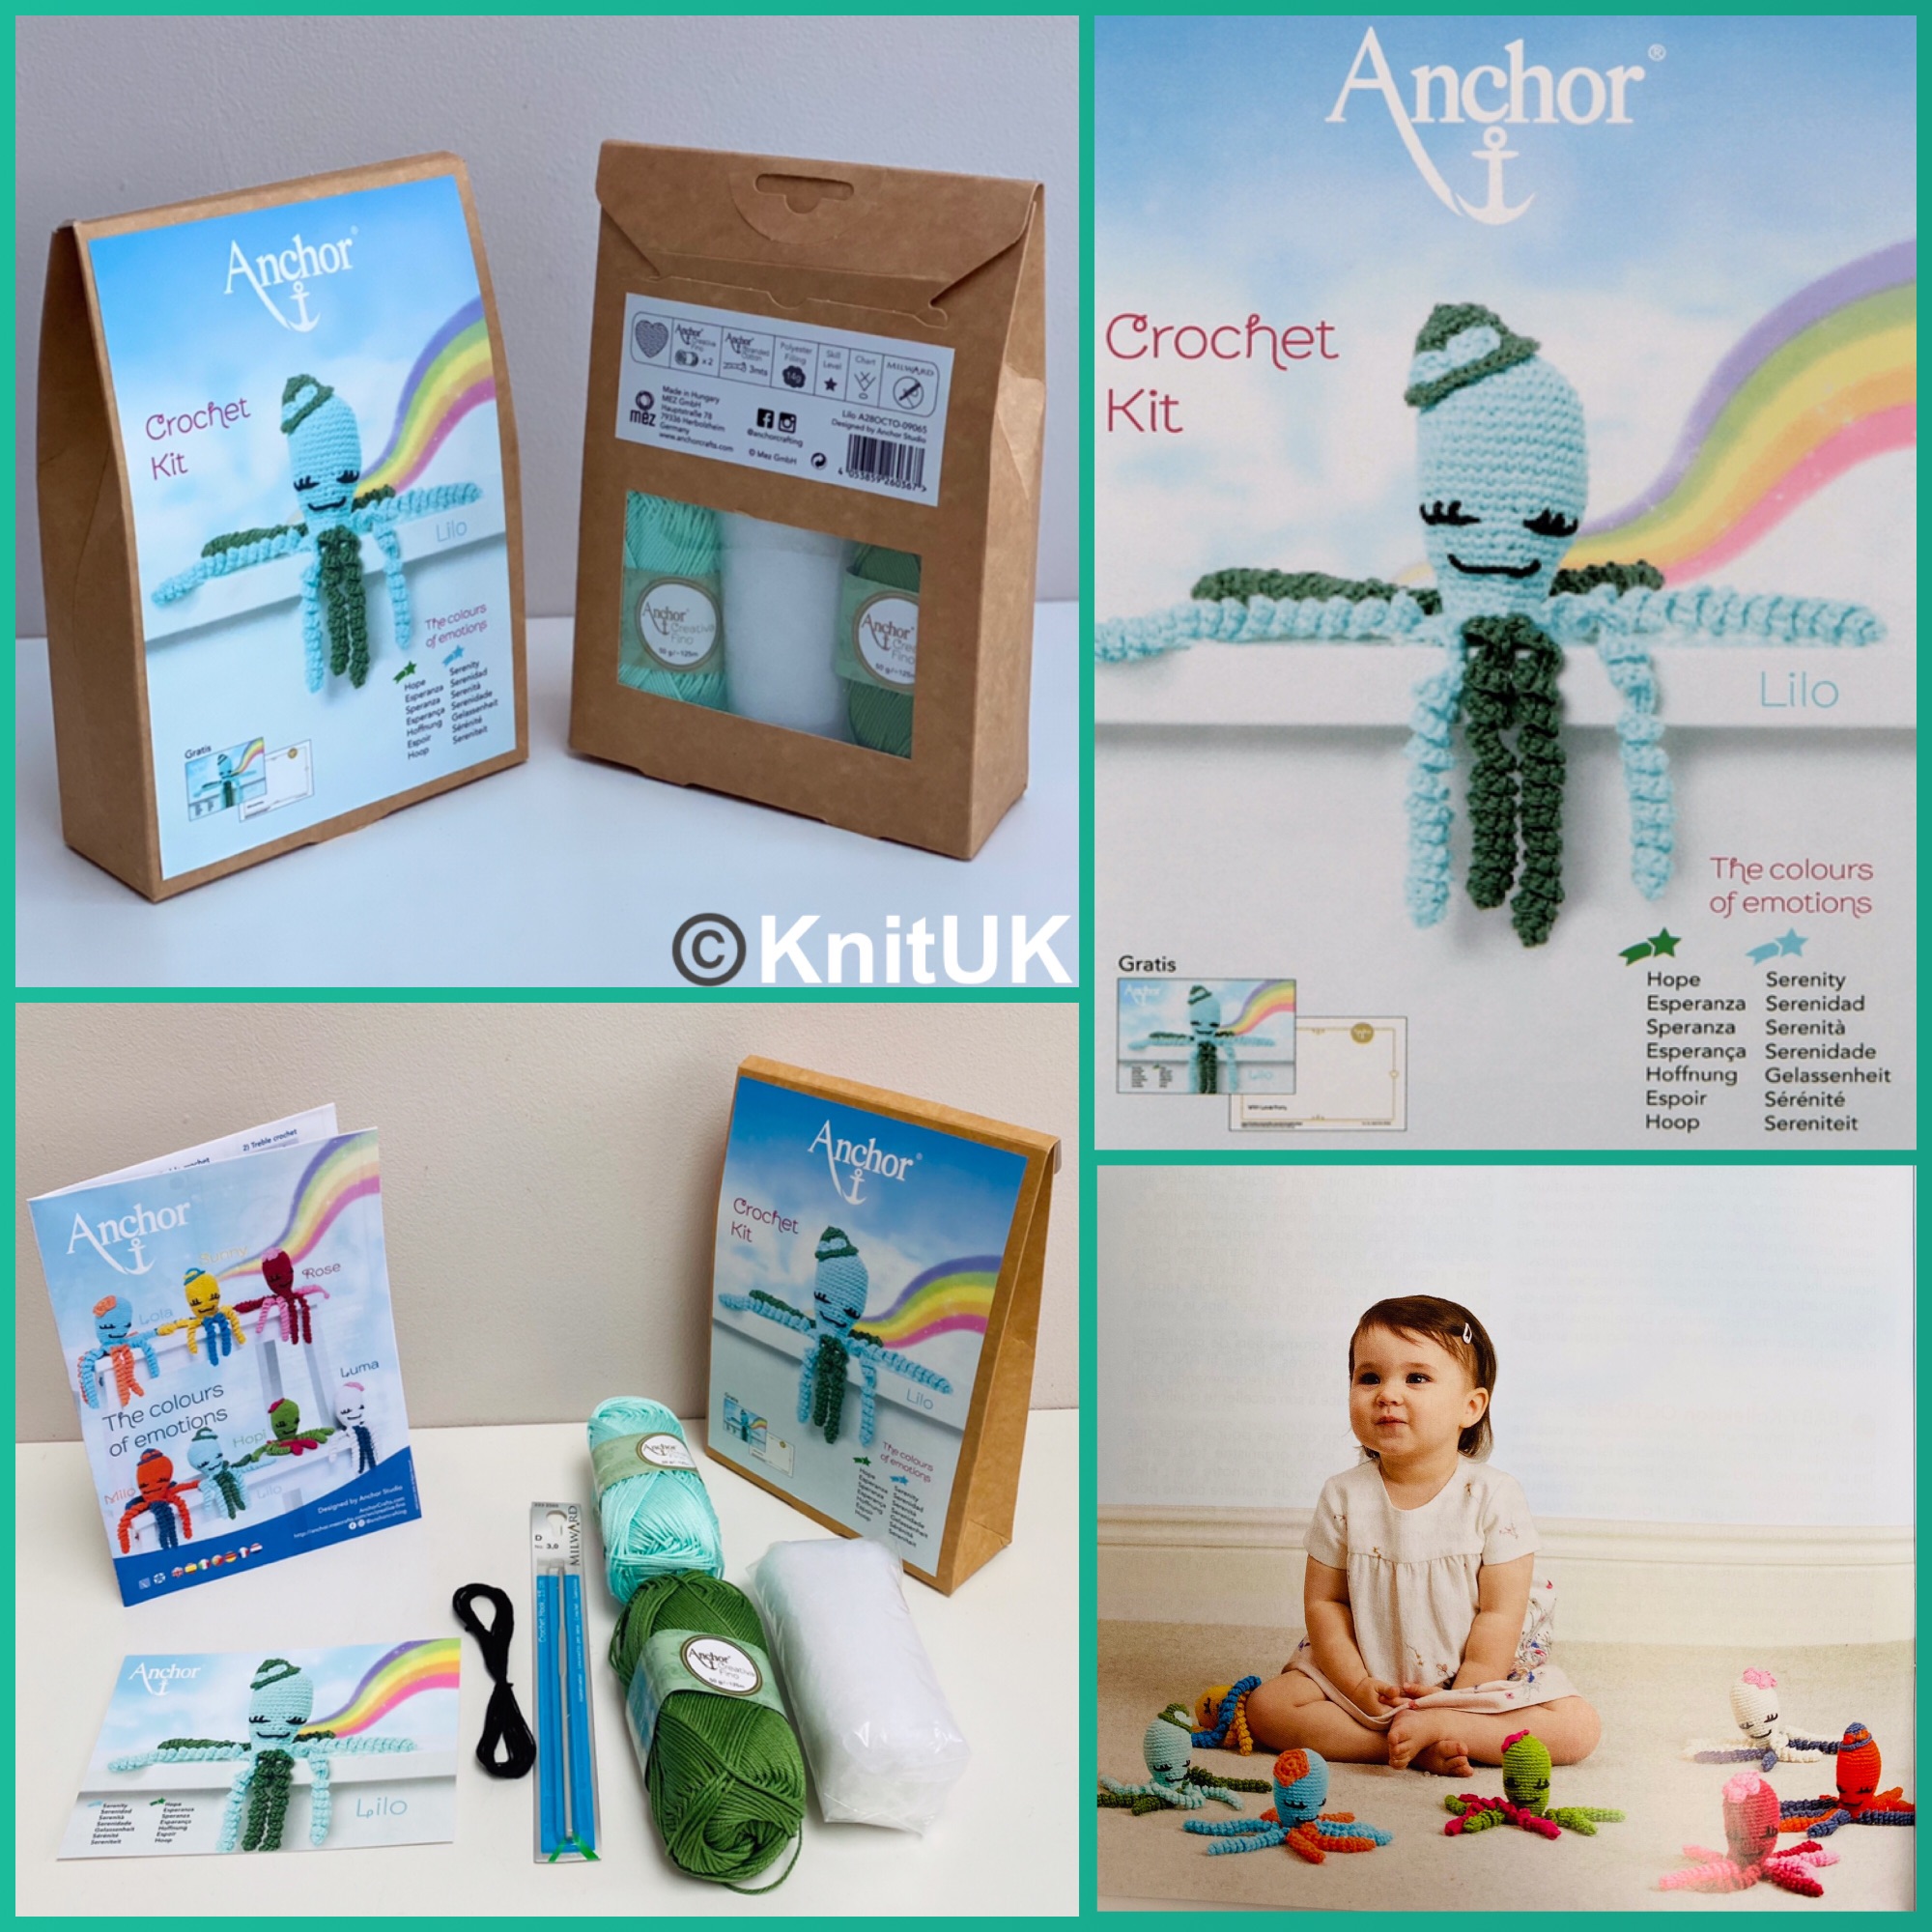 Anchor crochet kit octopus Lilo the colours of emotions with mint green cot